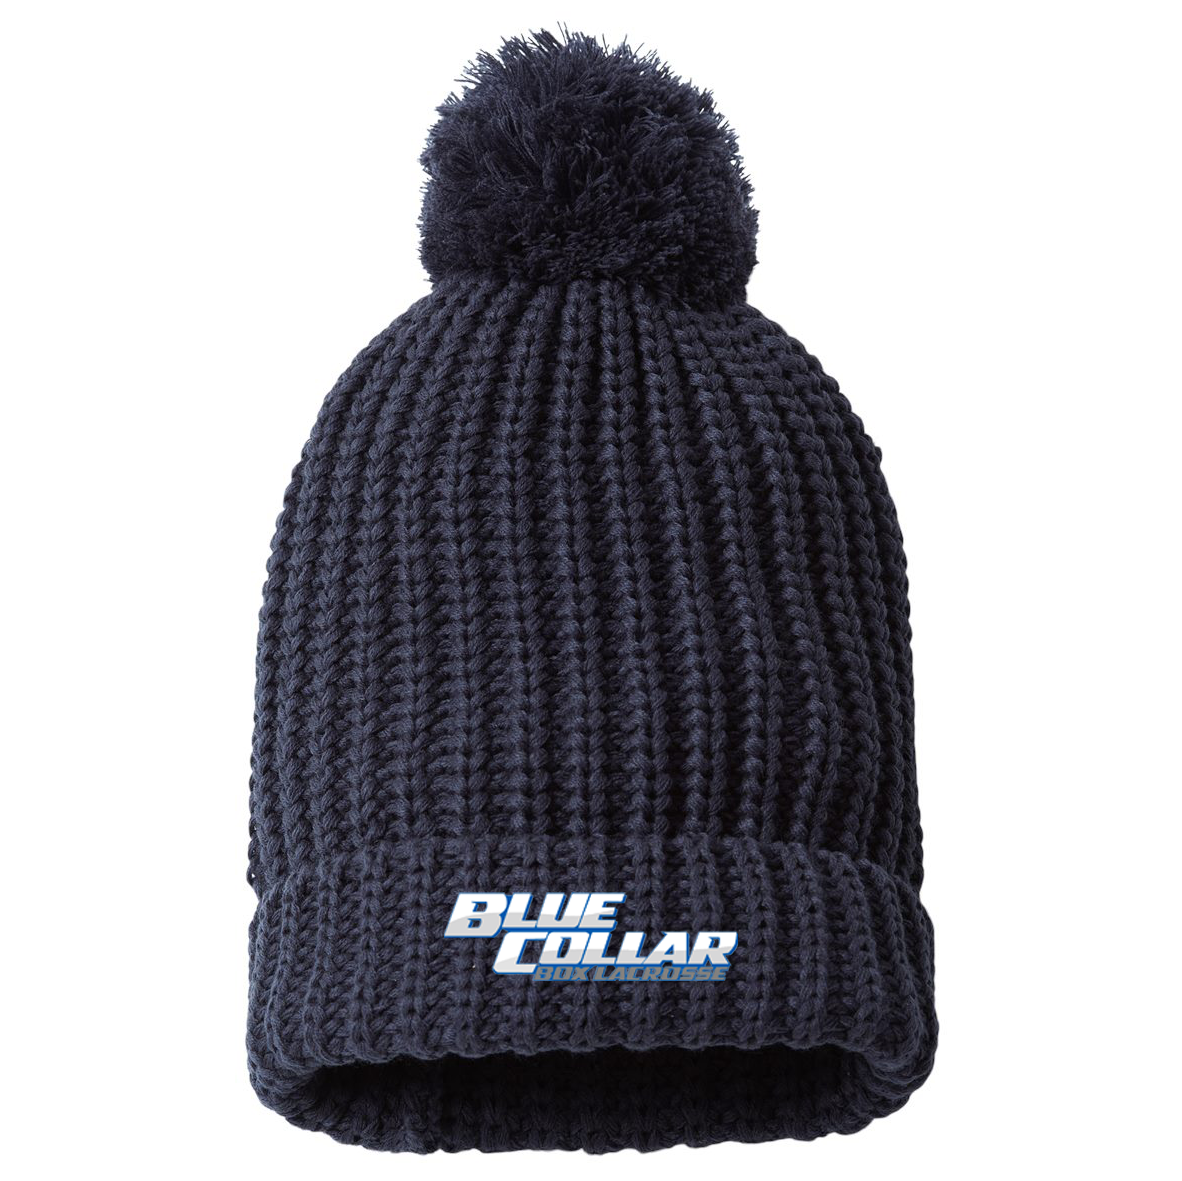 Blue Collar Box Lacrosse Chunky Cable with Cuff & Pom Beanie